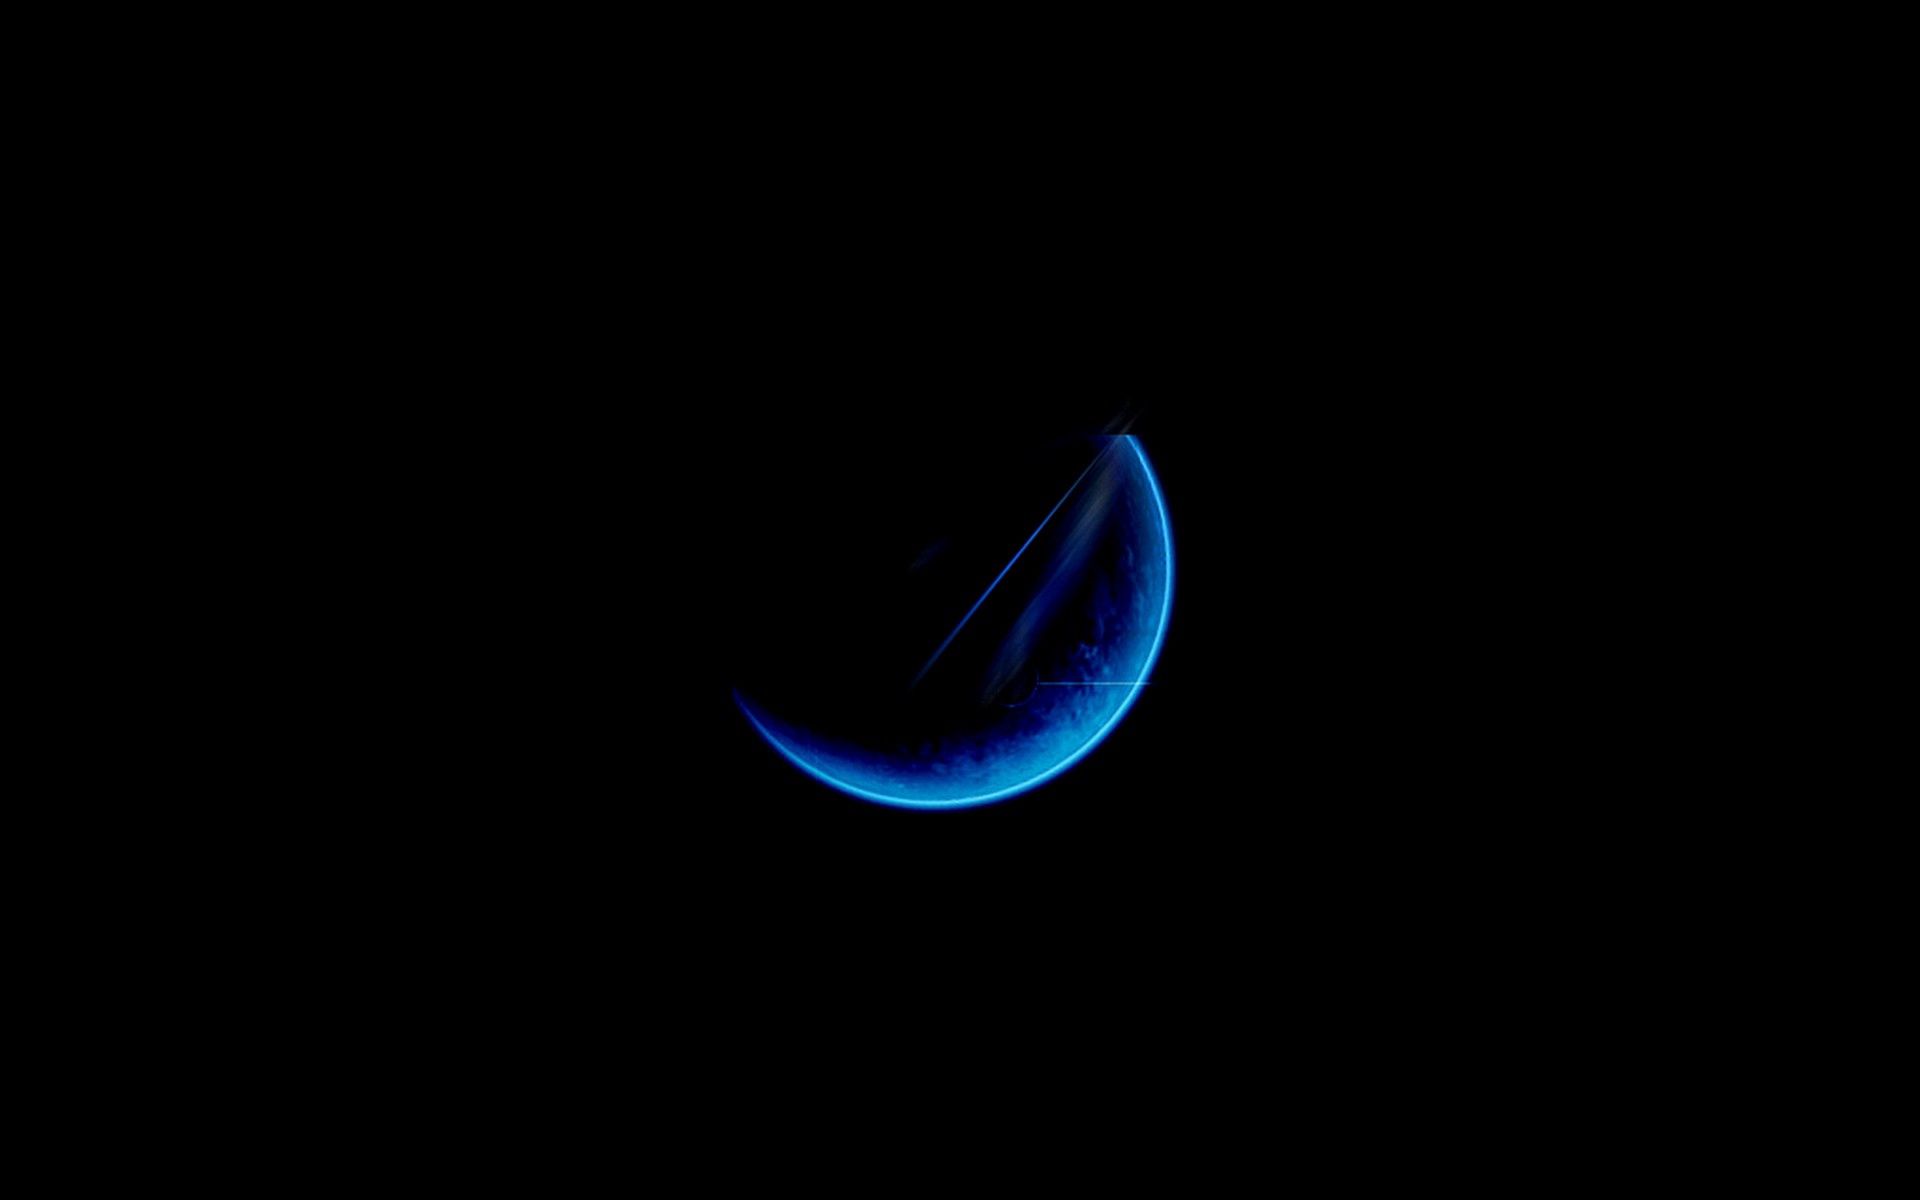 67018 download wallpaper moon, black, blue, shine, light, minimalism screensavers and pictures for free